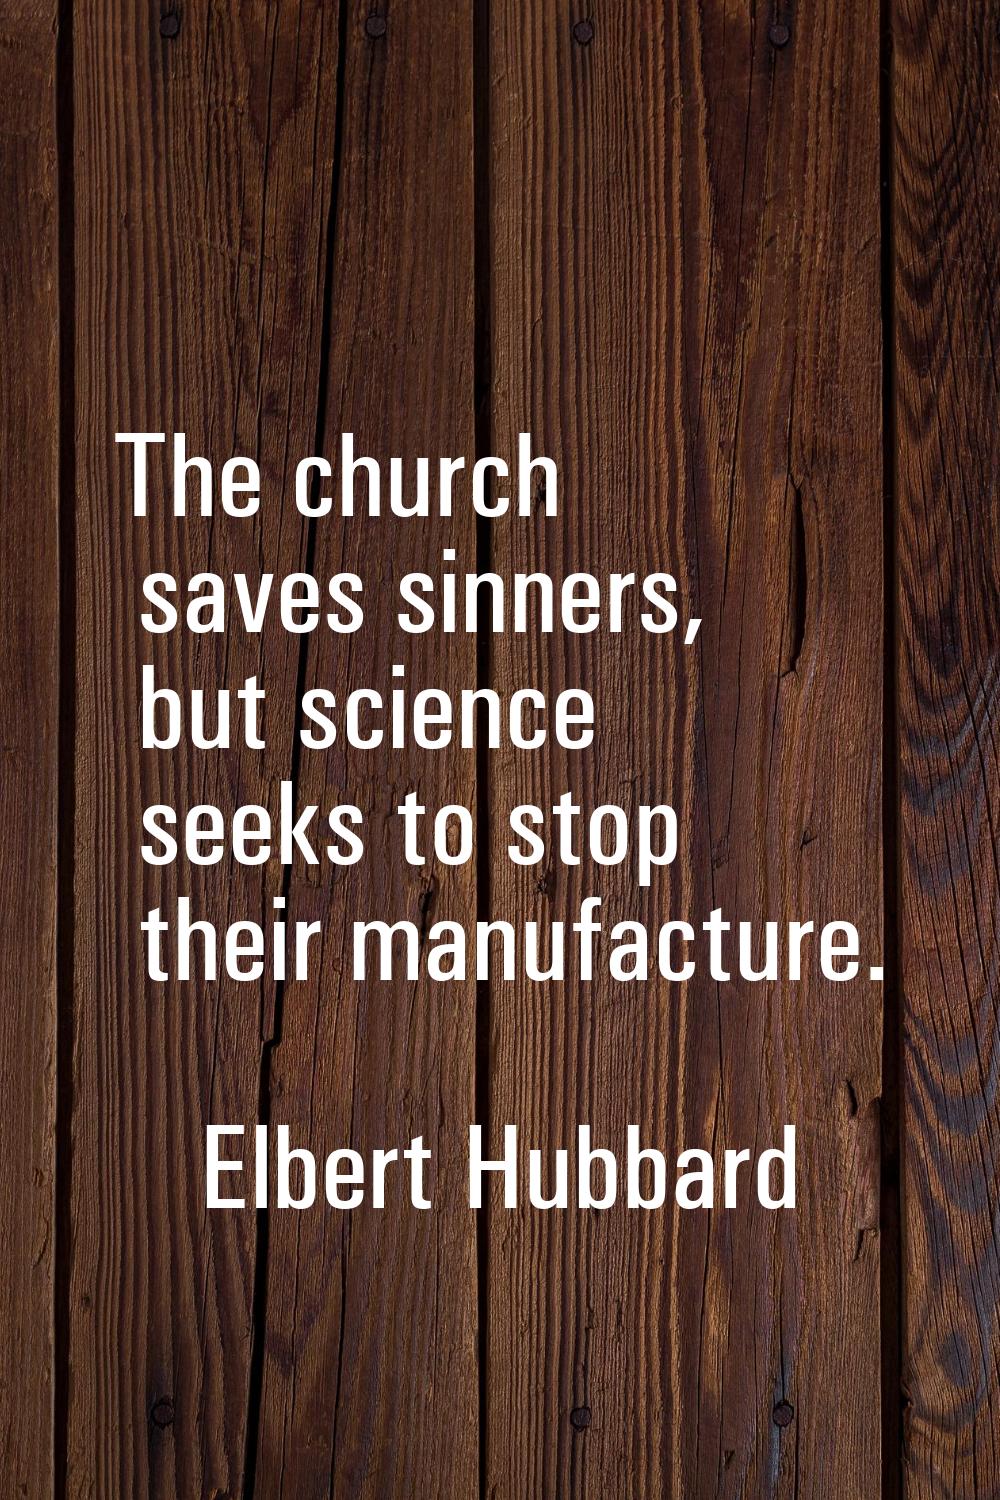 The church saves sinners, but science seeks to stop their manufacture.